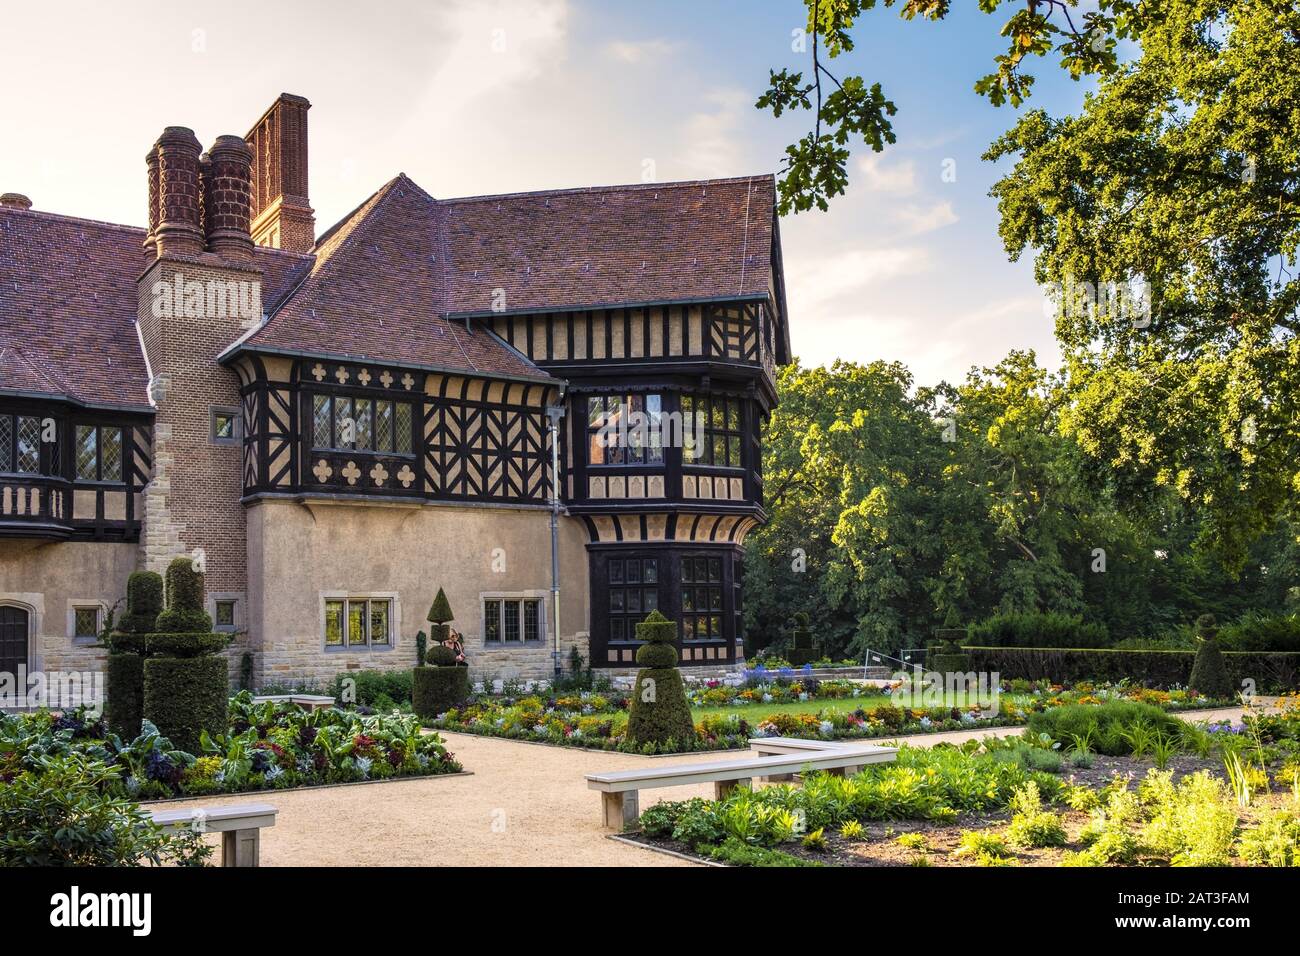 Potsdam, Brandenburg / Germany - 2018/07/29: Exterior of the Cecilienhof Palace - Cecilienhof Schloss - historic place of the Potsdam Conference of 1945 within the New Park complex Stock Photo